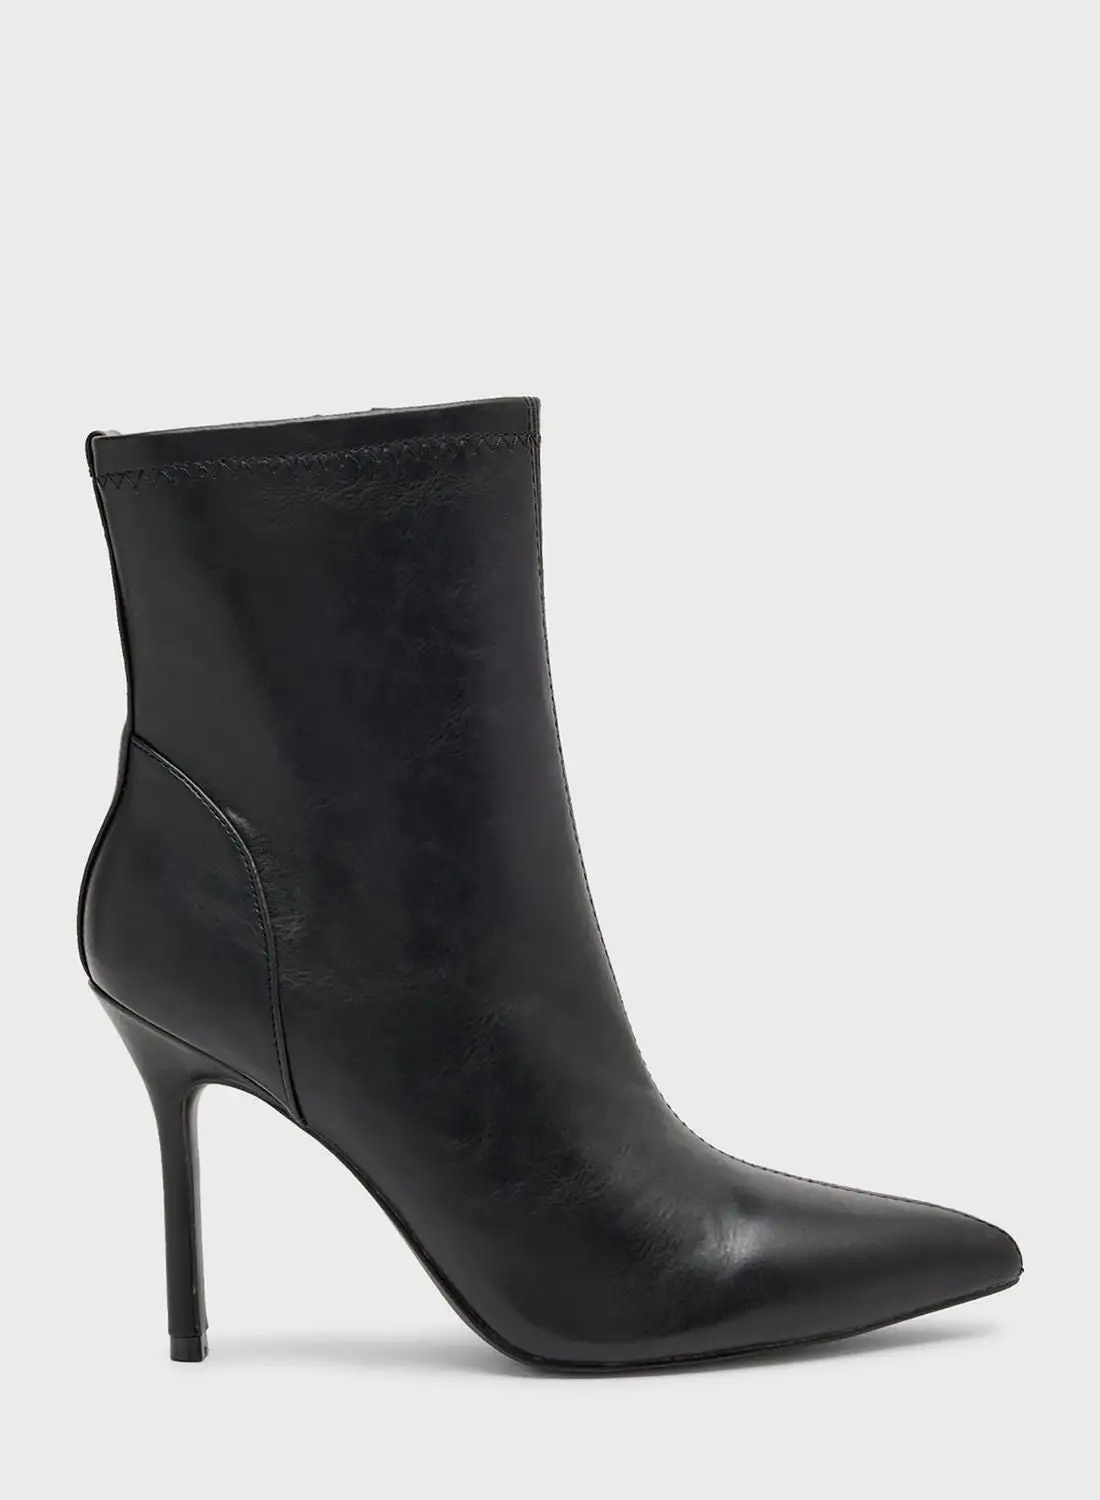 ONLY Pointed Toe Heeled Boots